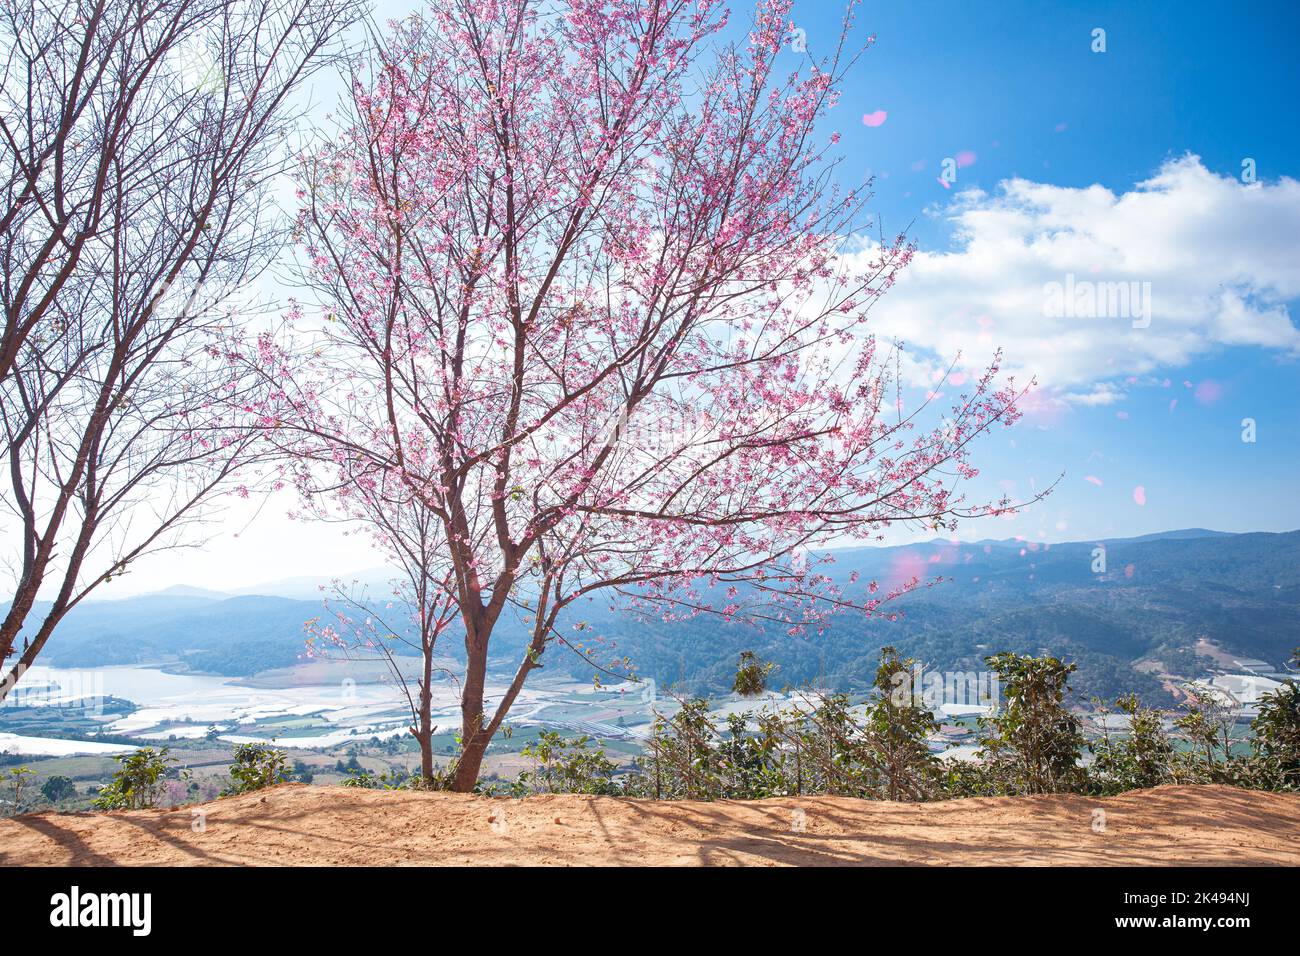 Cherry blossom, Mai Anh Dao prunus cerasoides flower in blue sky in Lac Duong, Da Lat, Lam Dong, Viet nam, Pink blossoms on the branch with blue sky d Stock Photo